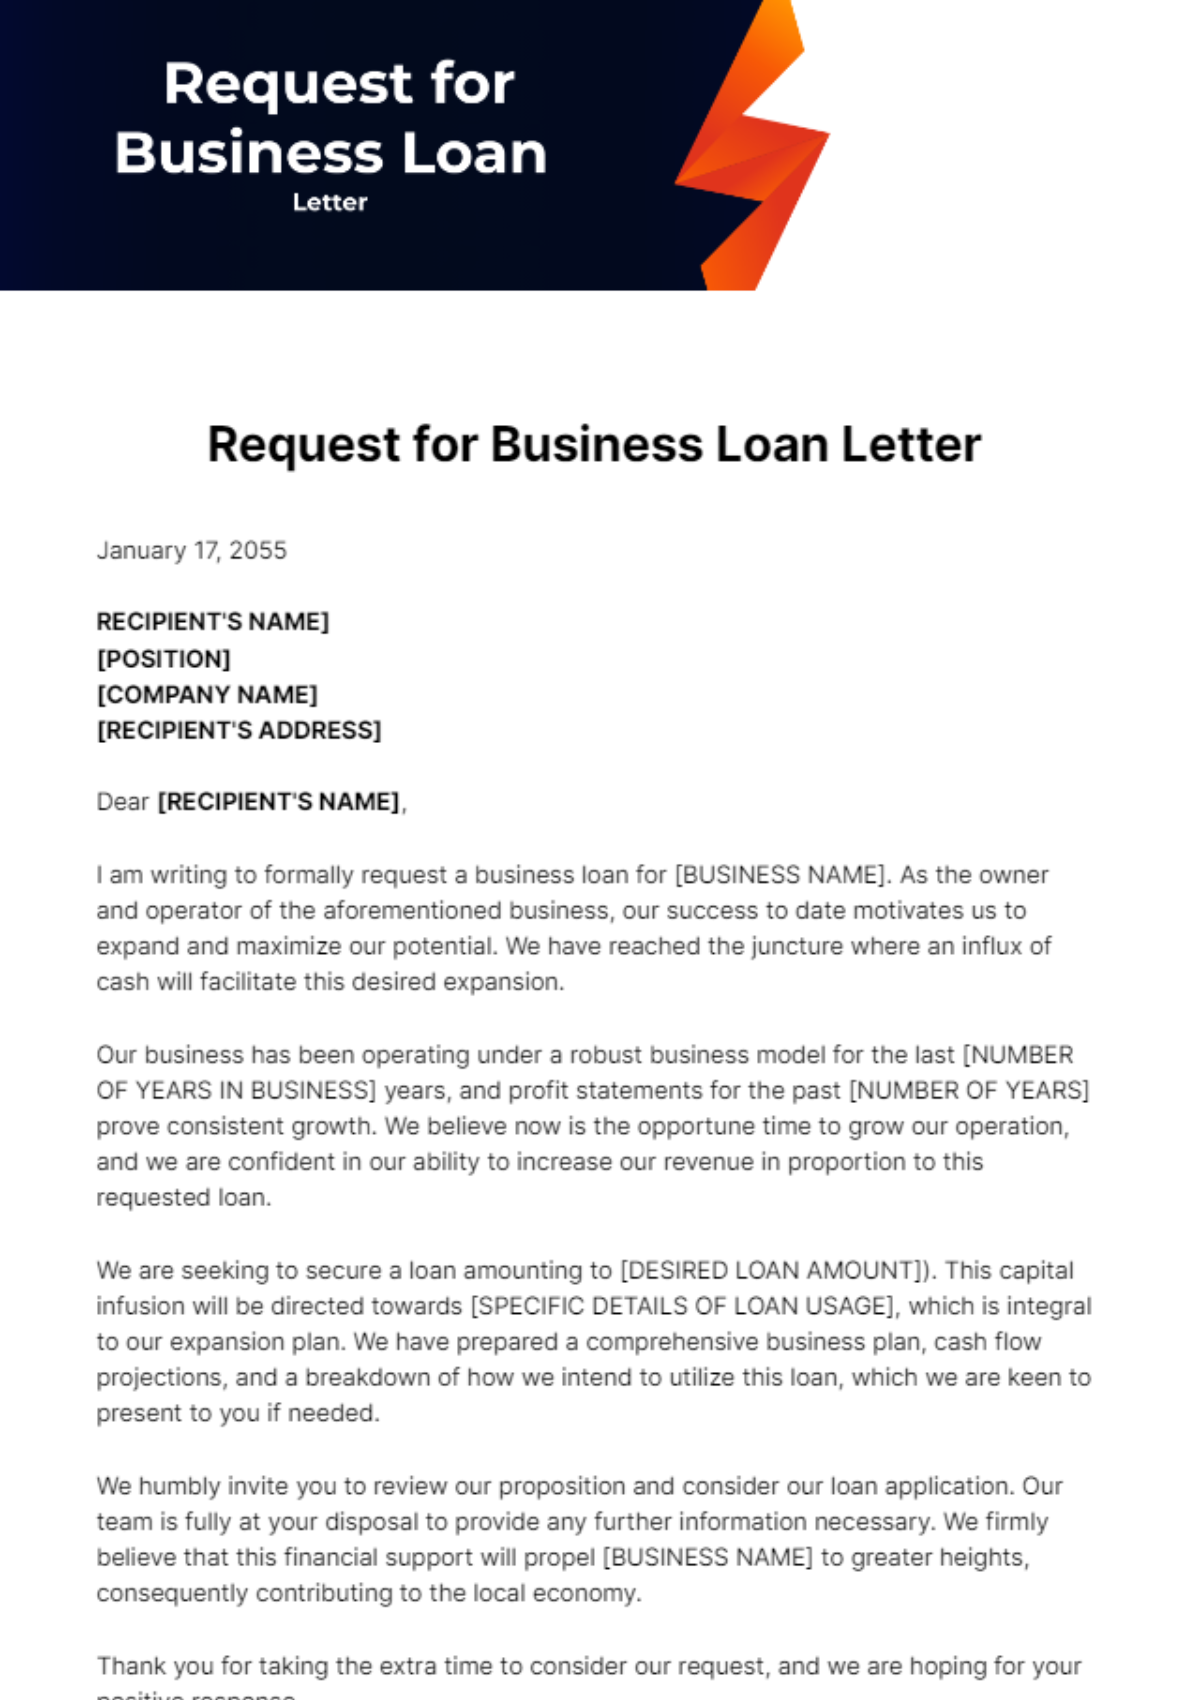 Free Request for Business Loan Letter Template